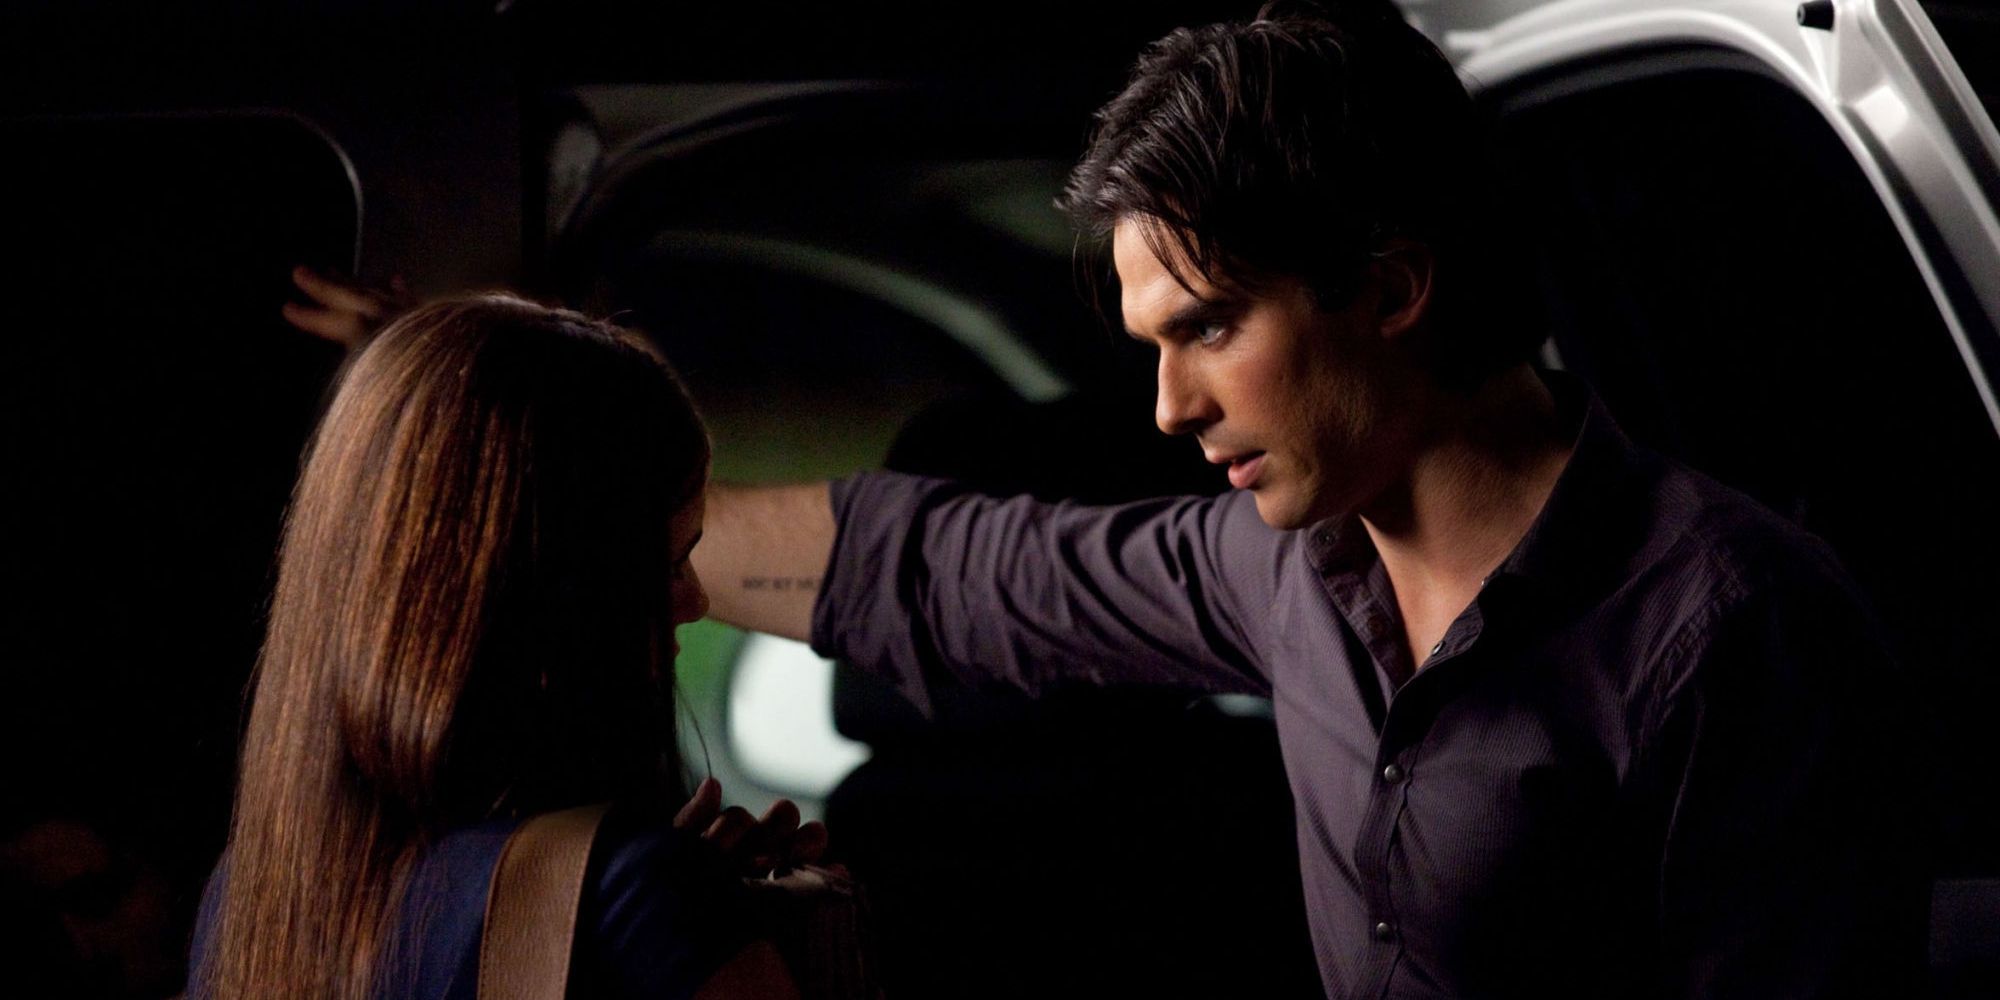 Elena and Damon outside the car in The Vampire Diaries.